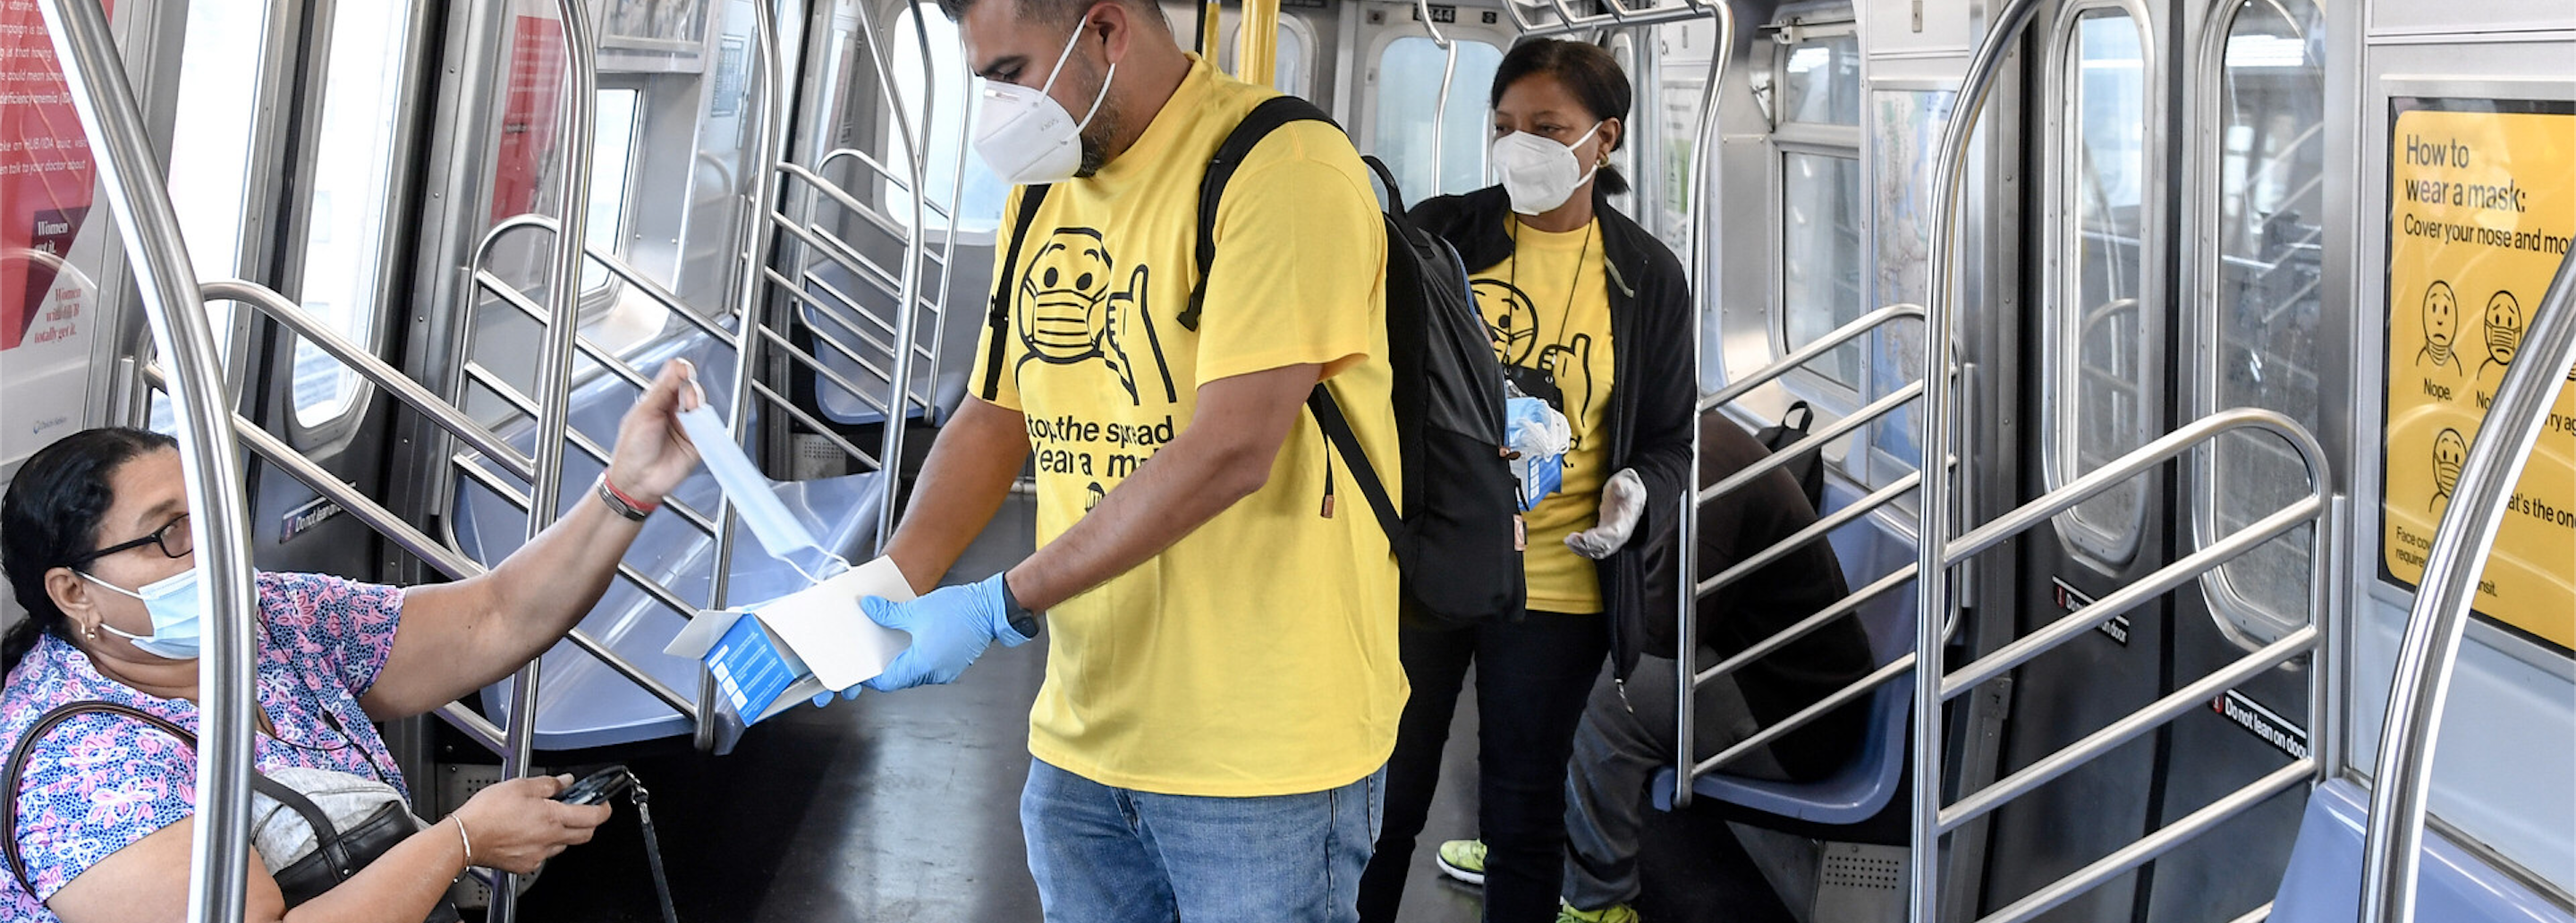 Mask Force Volunteers in yellow tshirts handing out masks to subway rider